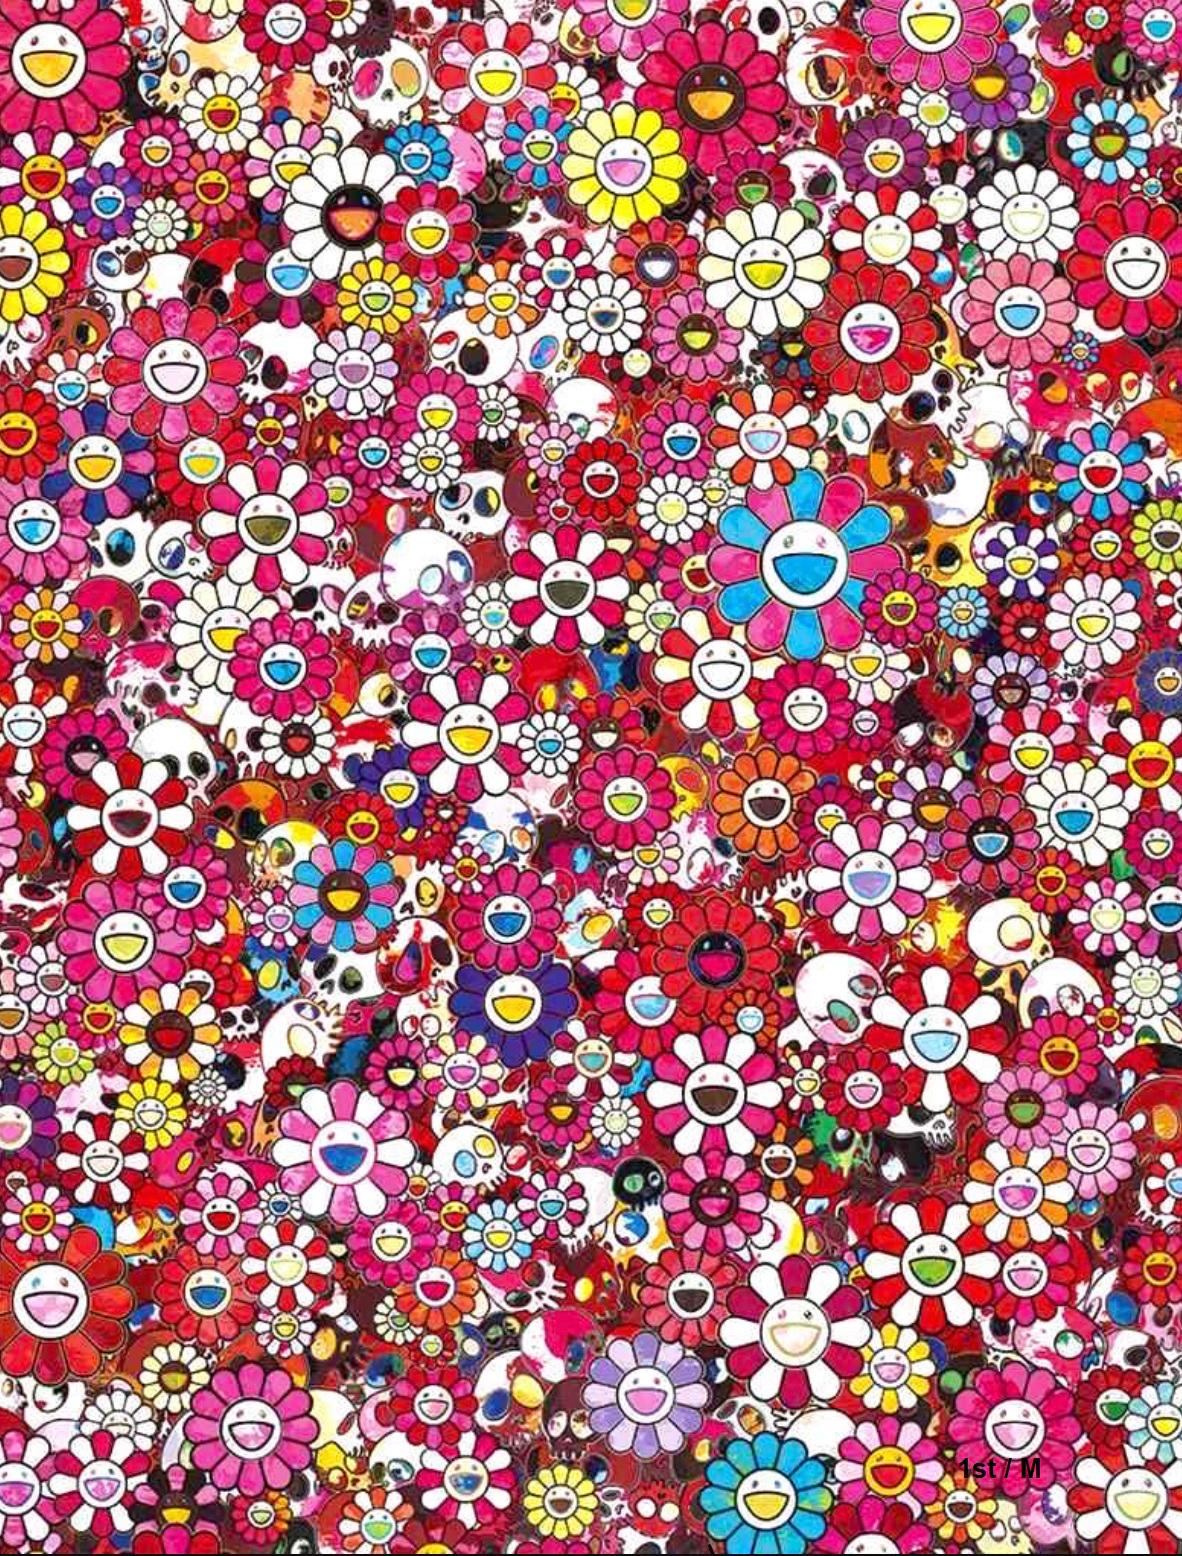 Takashi Murakami Abstract Print - Offset print - Skulls and Flowers Red 2013 - sold framed (or unframed)